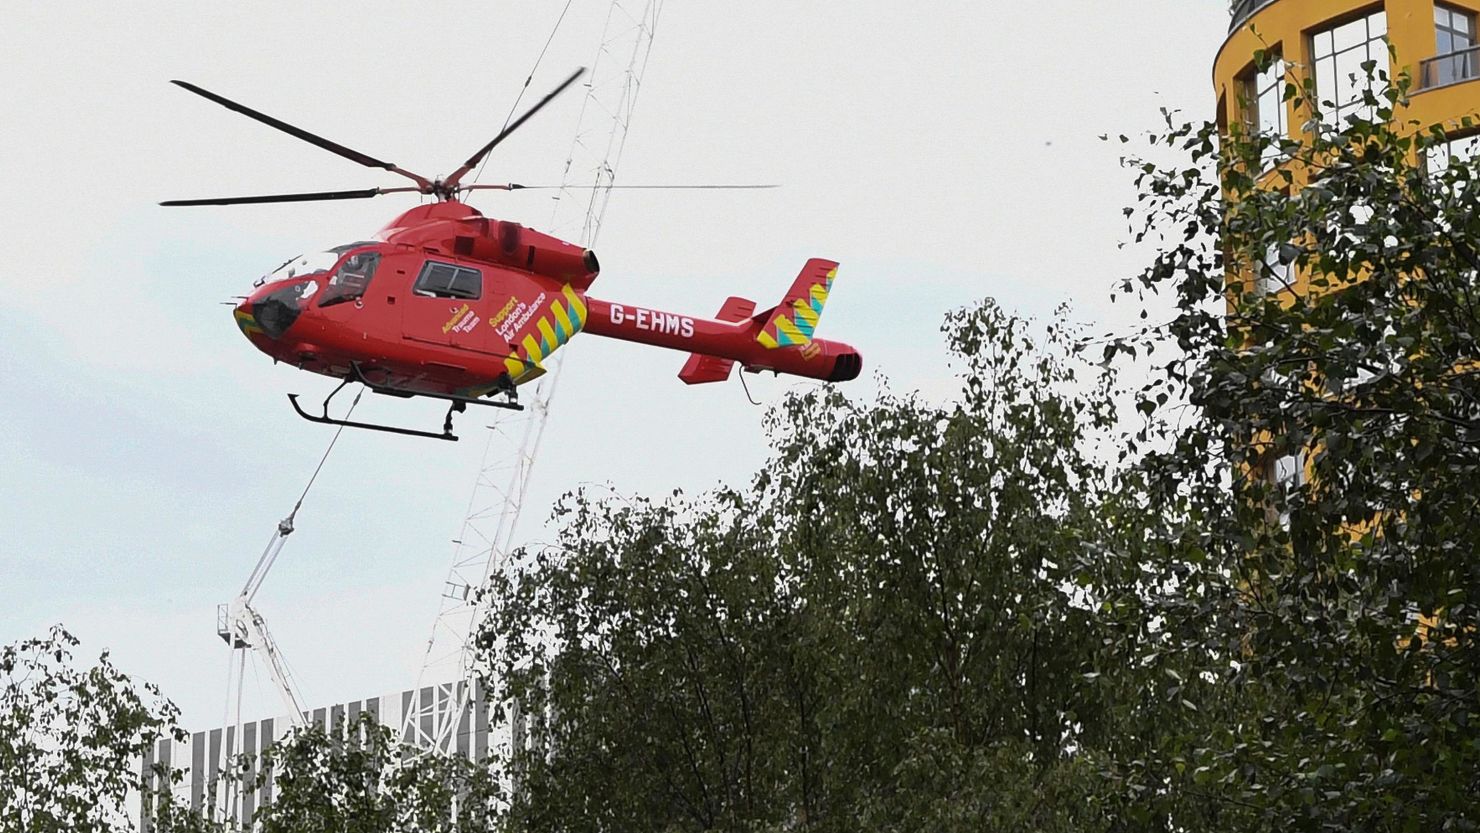 A London Air Ambulance helicopter airlifted the boy from the Tate Modern gallery on August 4, 2019.